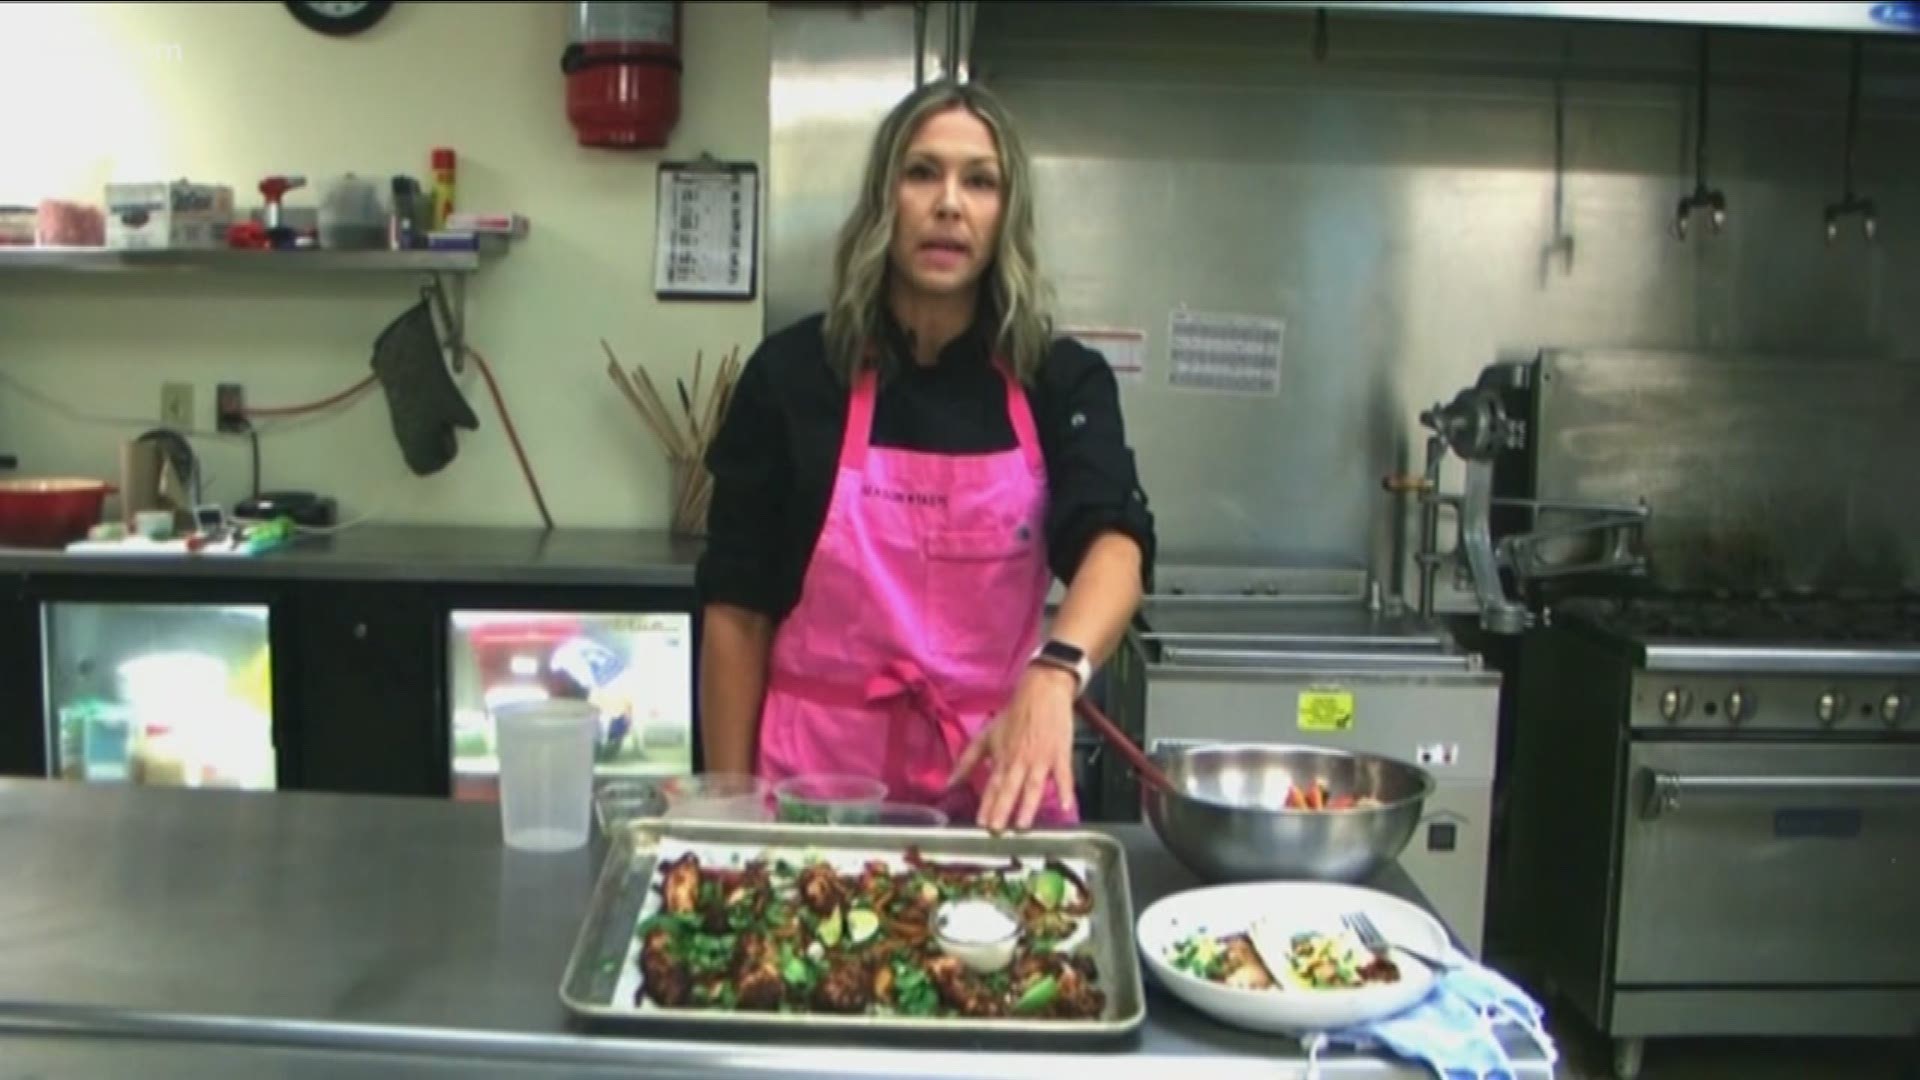 Chef Christina Murray walks us through how to cook healthy fajitas at home by using a sheet pan in the oven.